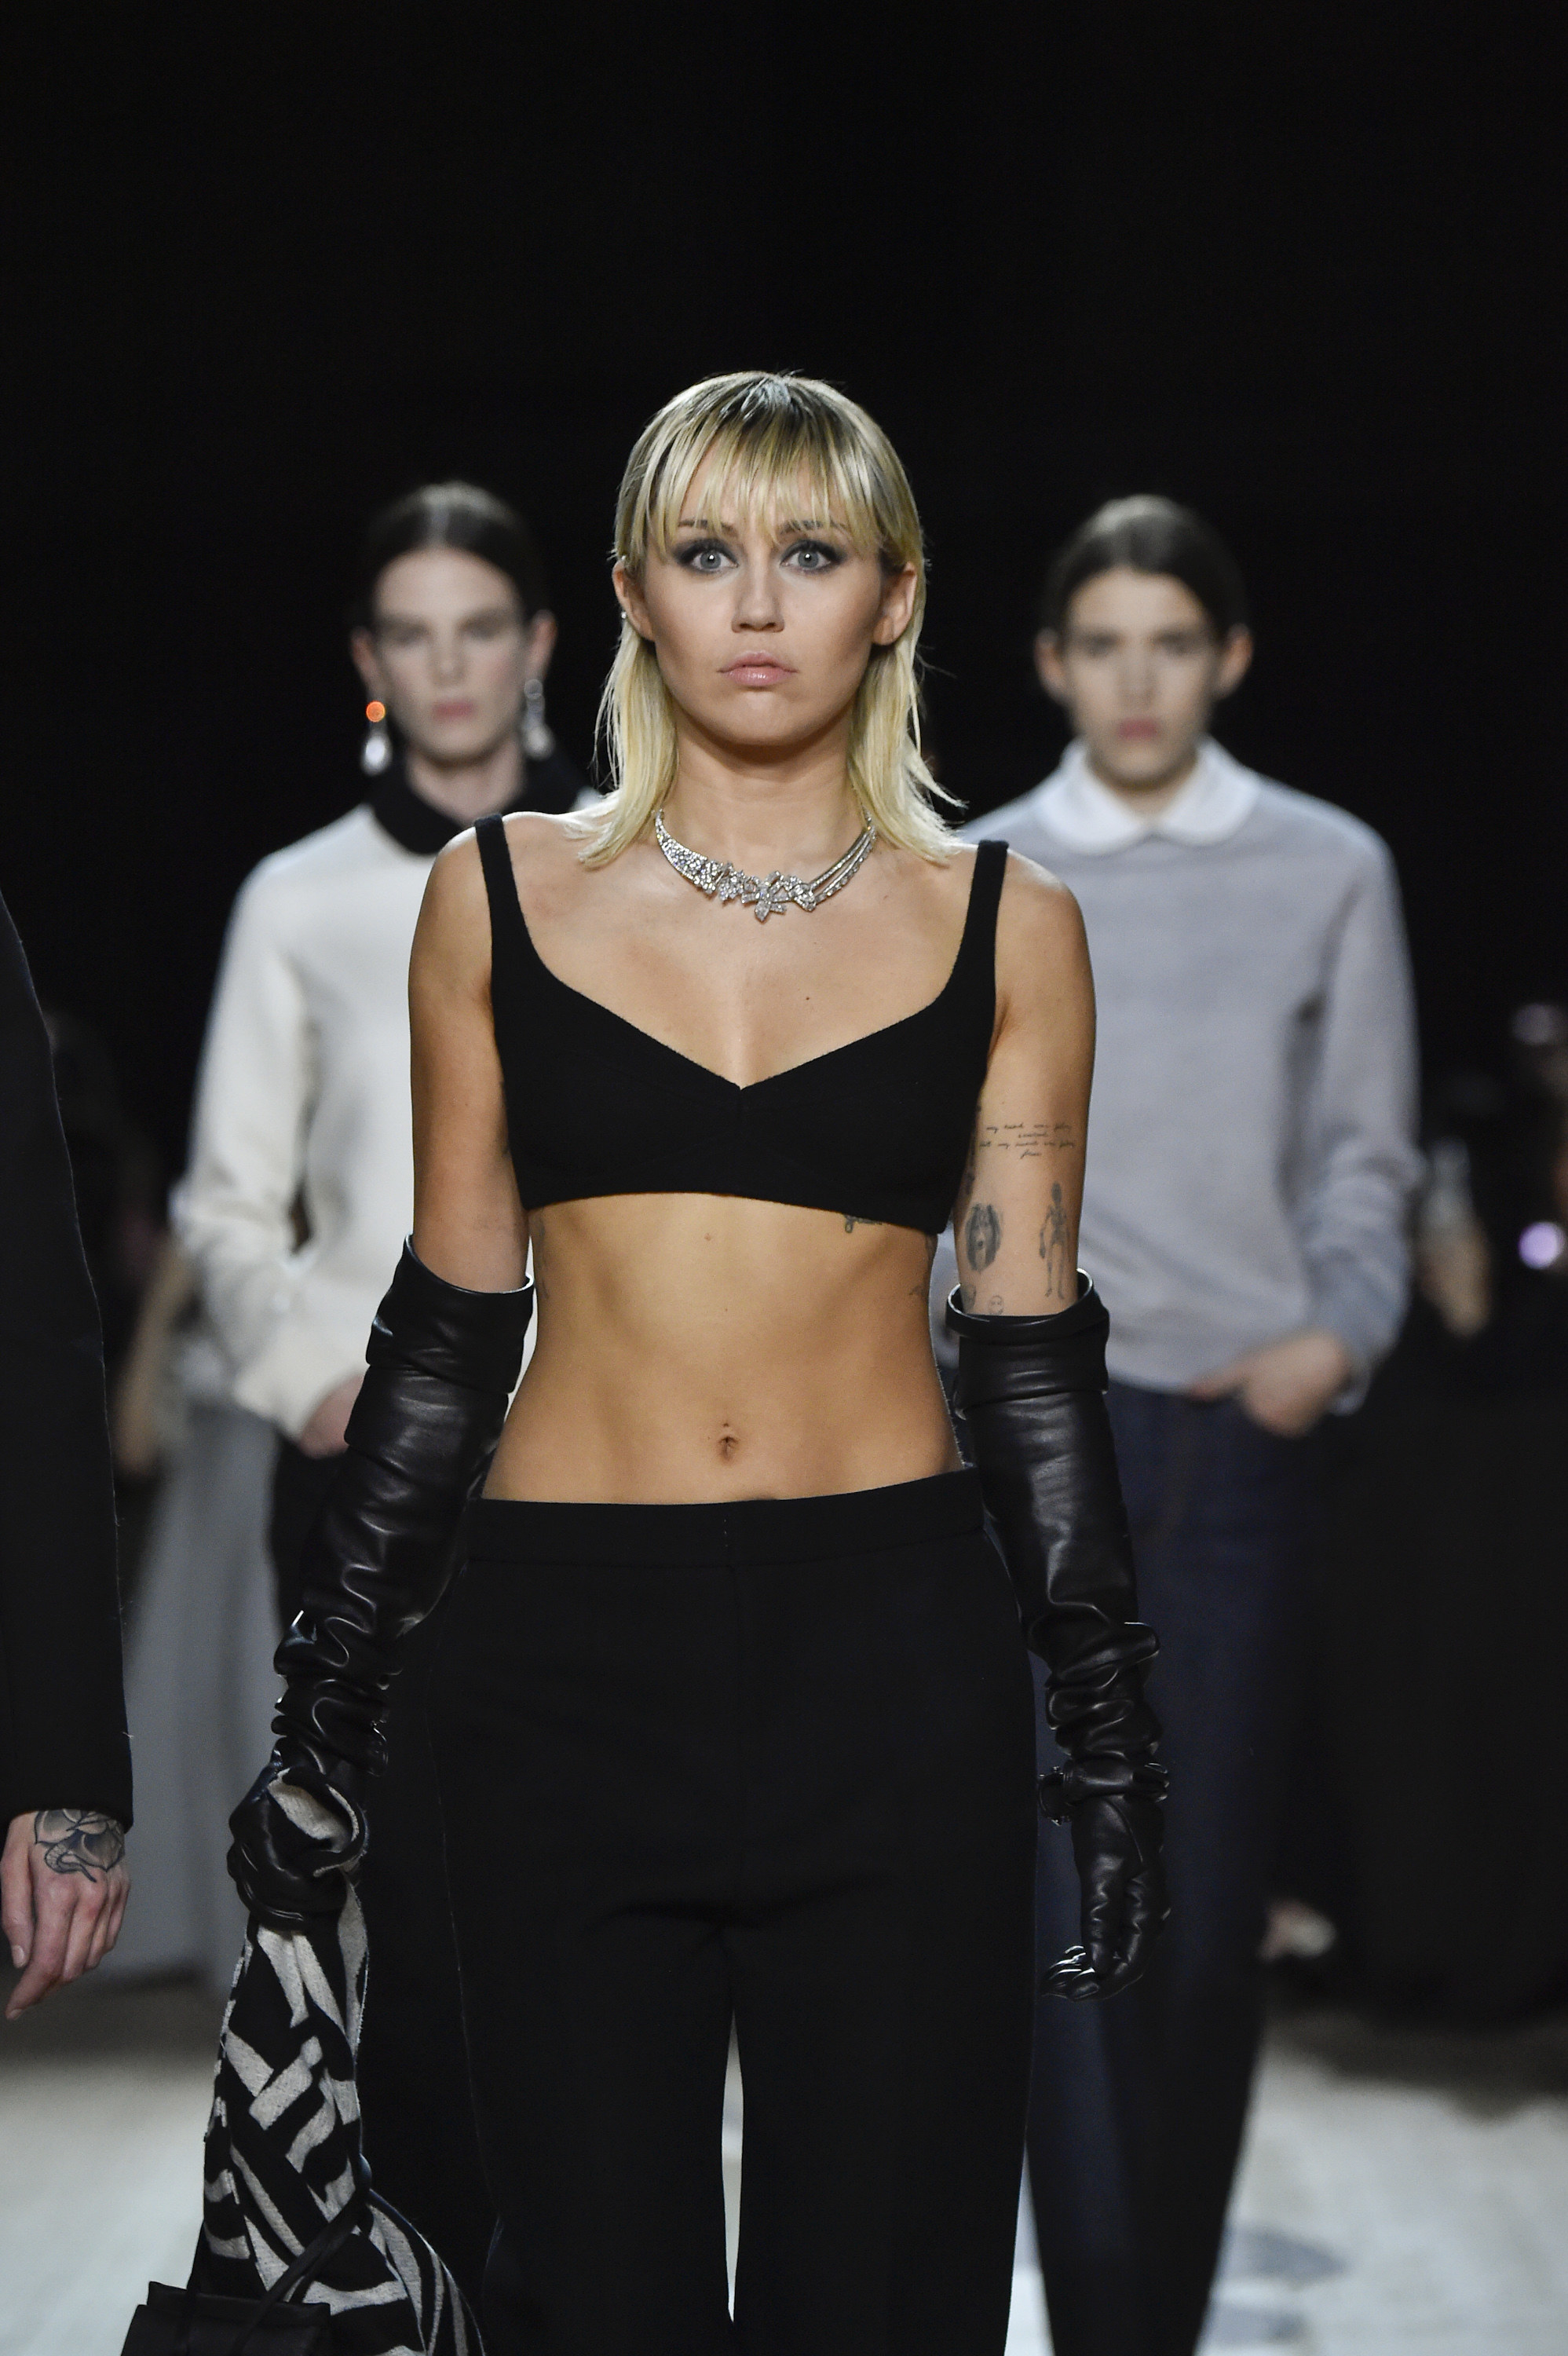 Miley Cyrus walks the runway at the Marc Jacobs Ready to Wear Fall/Winter 2020-2021 fashion show during New York Fashion Week on February 12, 2020 in New York City